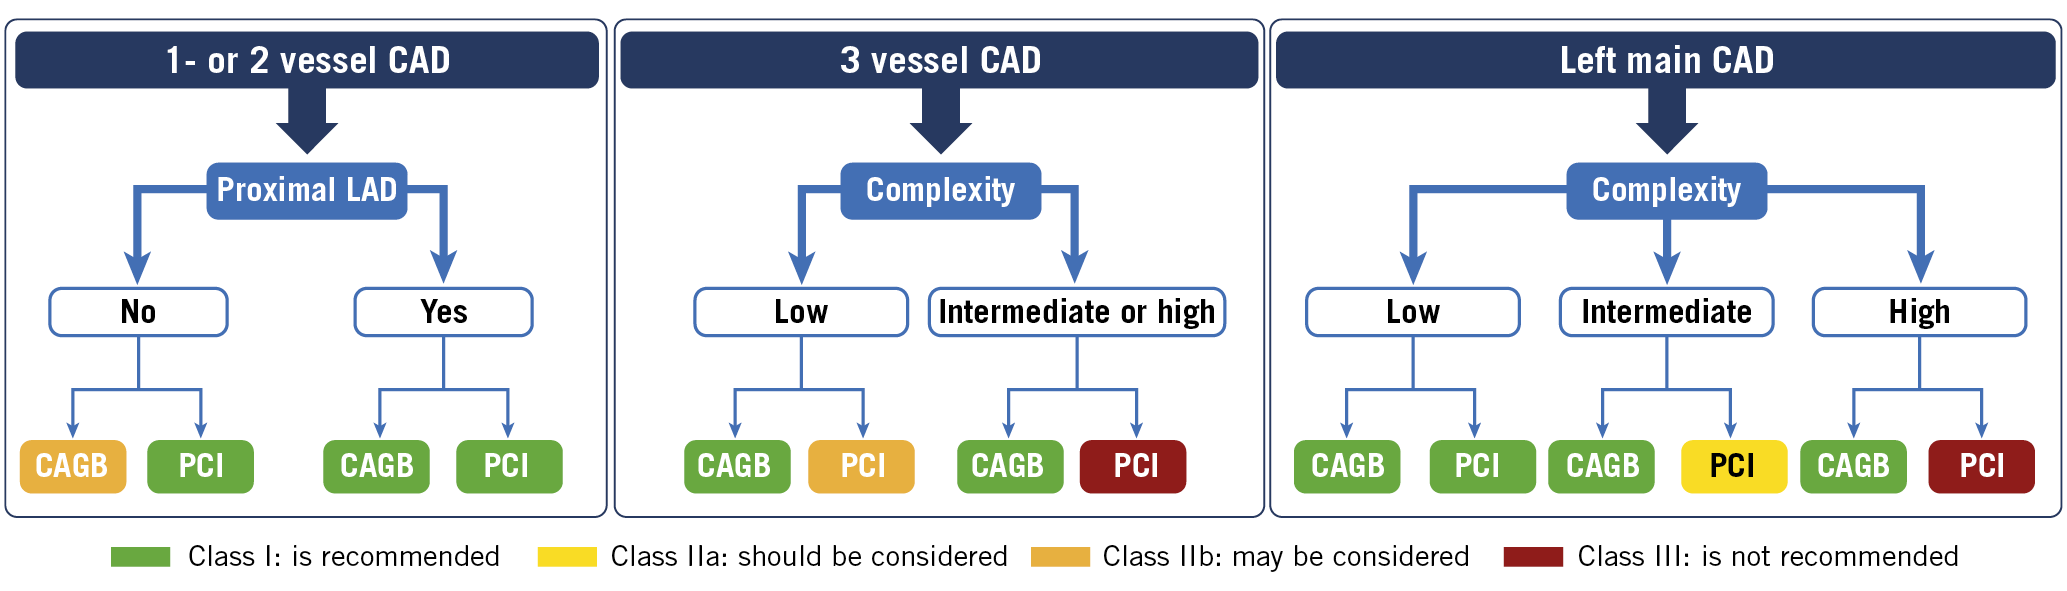 Figure 1. Recommendations for coronary revascularisation adapted from the 2019 ESC guidelines on CVD and pre-diabetes and diabetes18. Low disease complexity coronary anatomy (SYNTAX score 0-22), intermediate disease complexity (SYNTAX score 23-32) and high disease complexity (SYNTAX score ≥33). CABG: coronary artery bypass graft; CAD: coronary artery disease; PCI: percutaneous coronary intervention